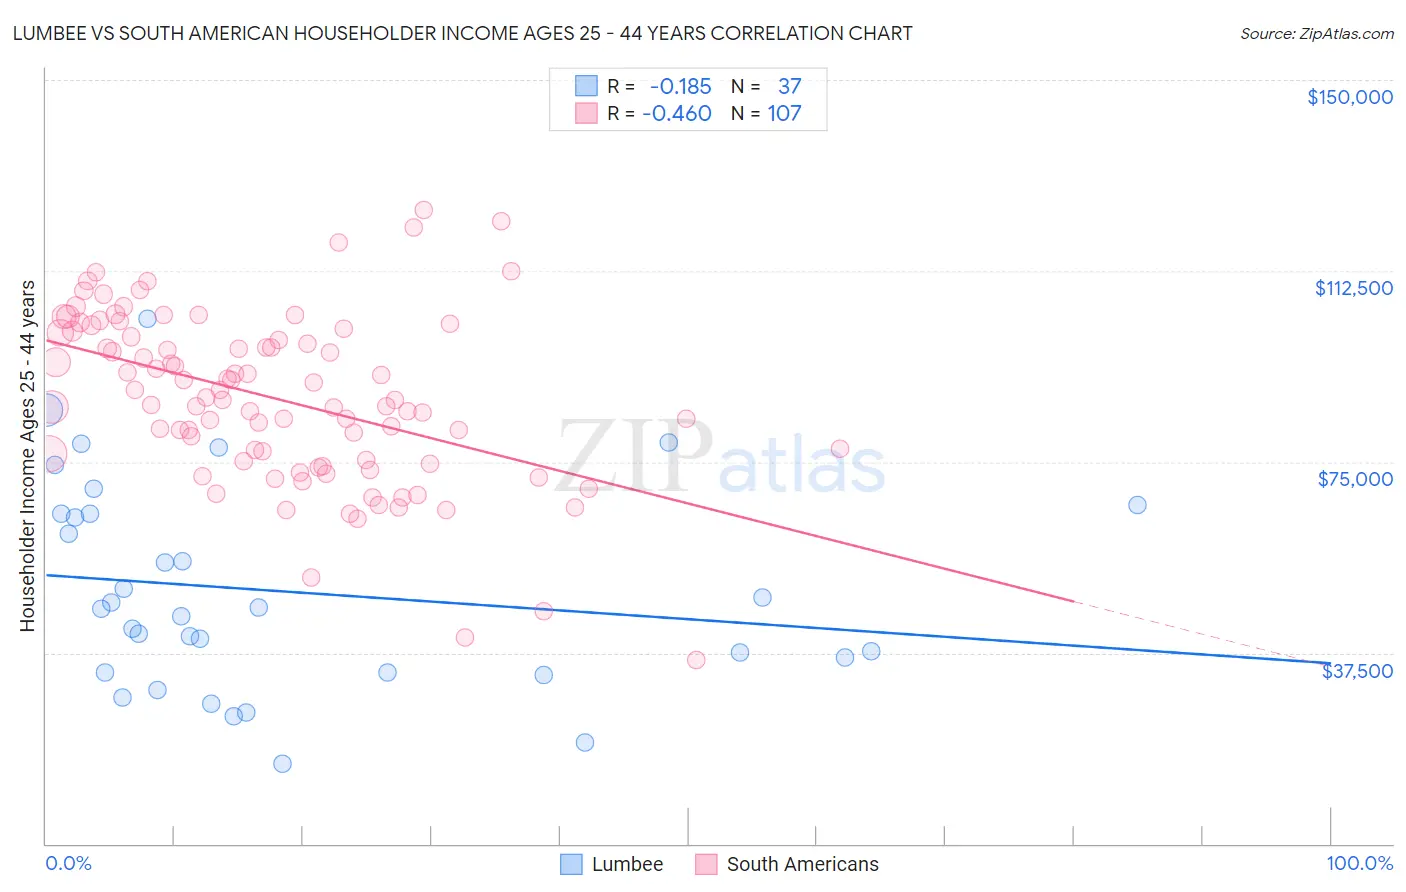 Lumbee vs South American Householder Income Ages 25 - 44 years